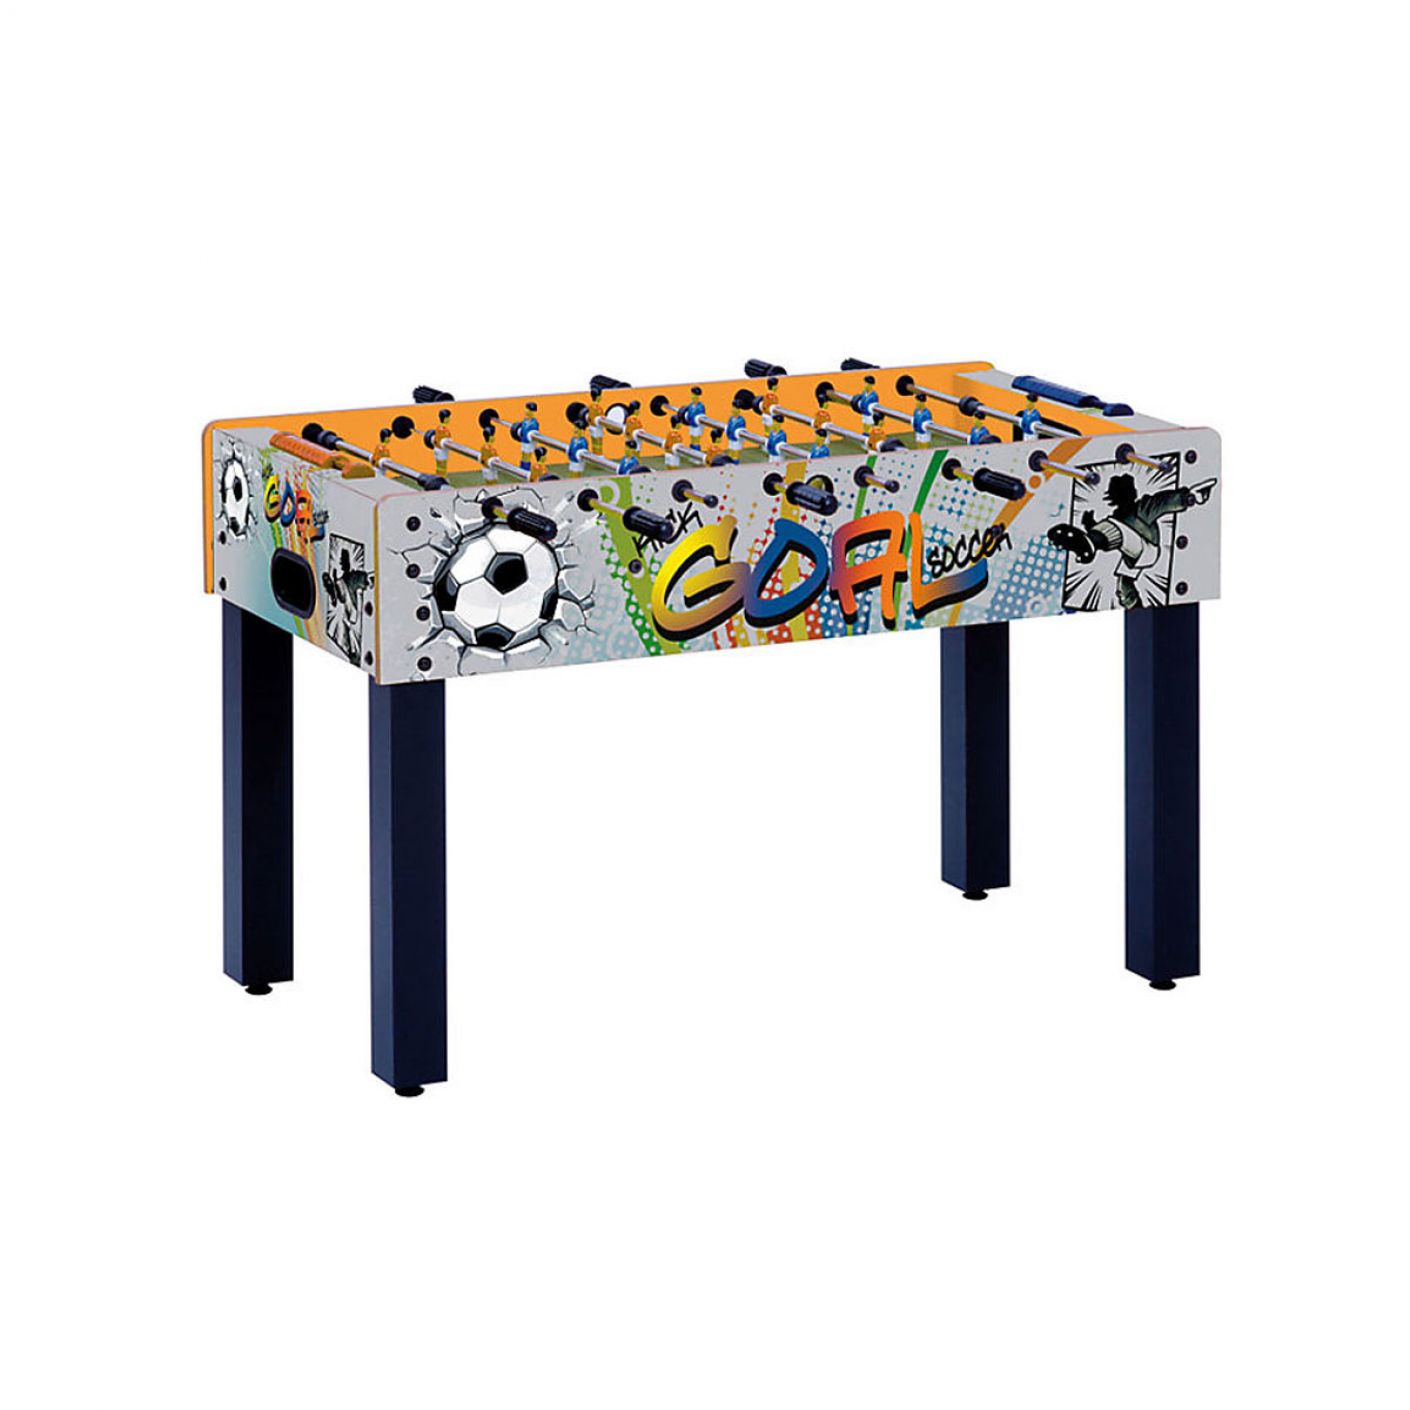 Garlando F-1 table football with GOAL graphics with retracting temples